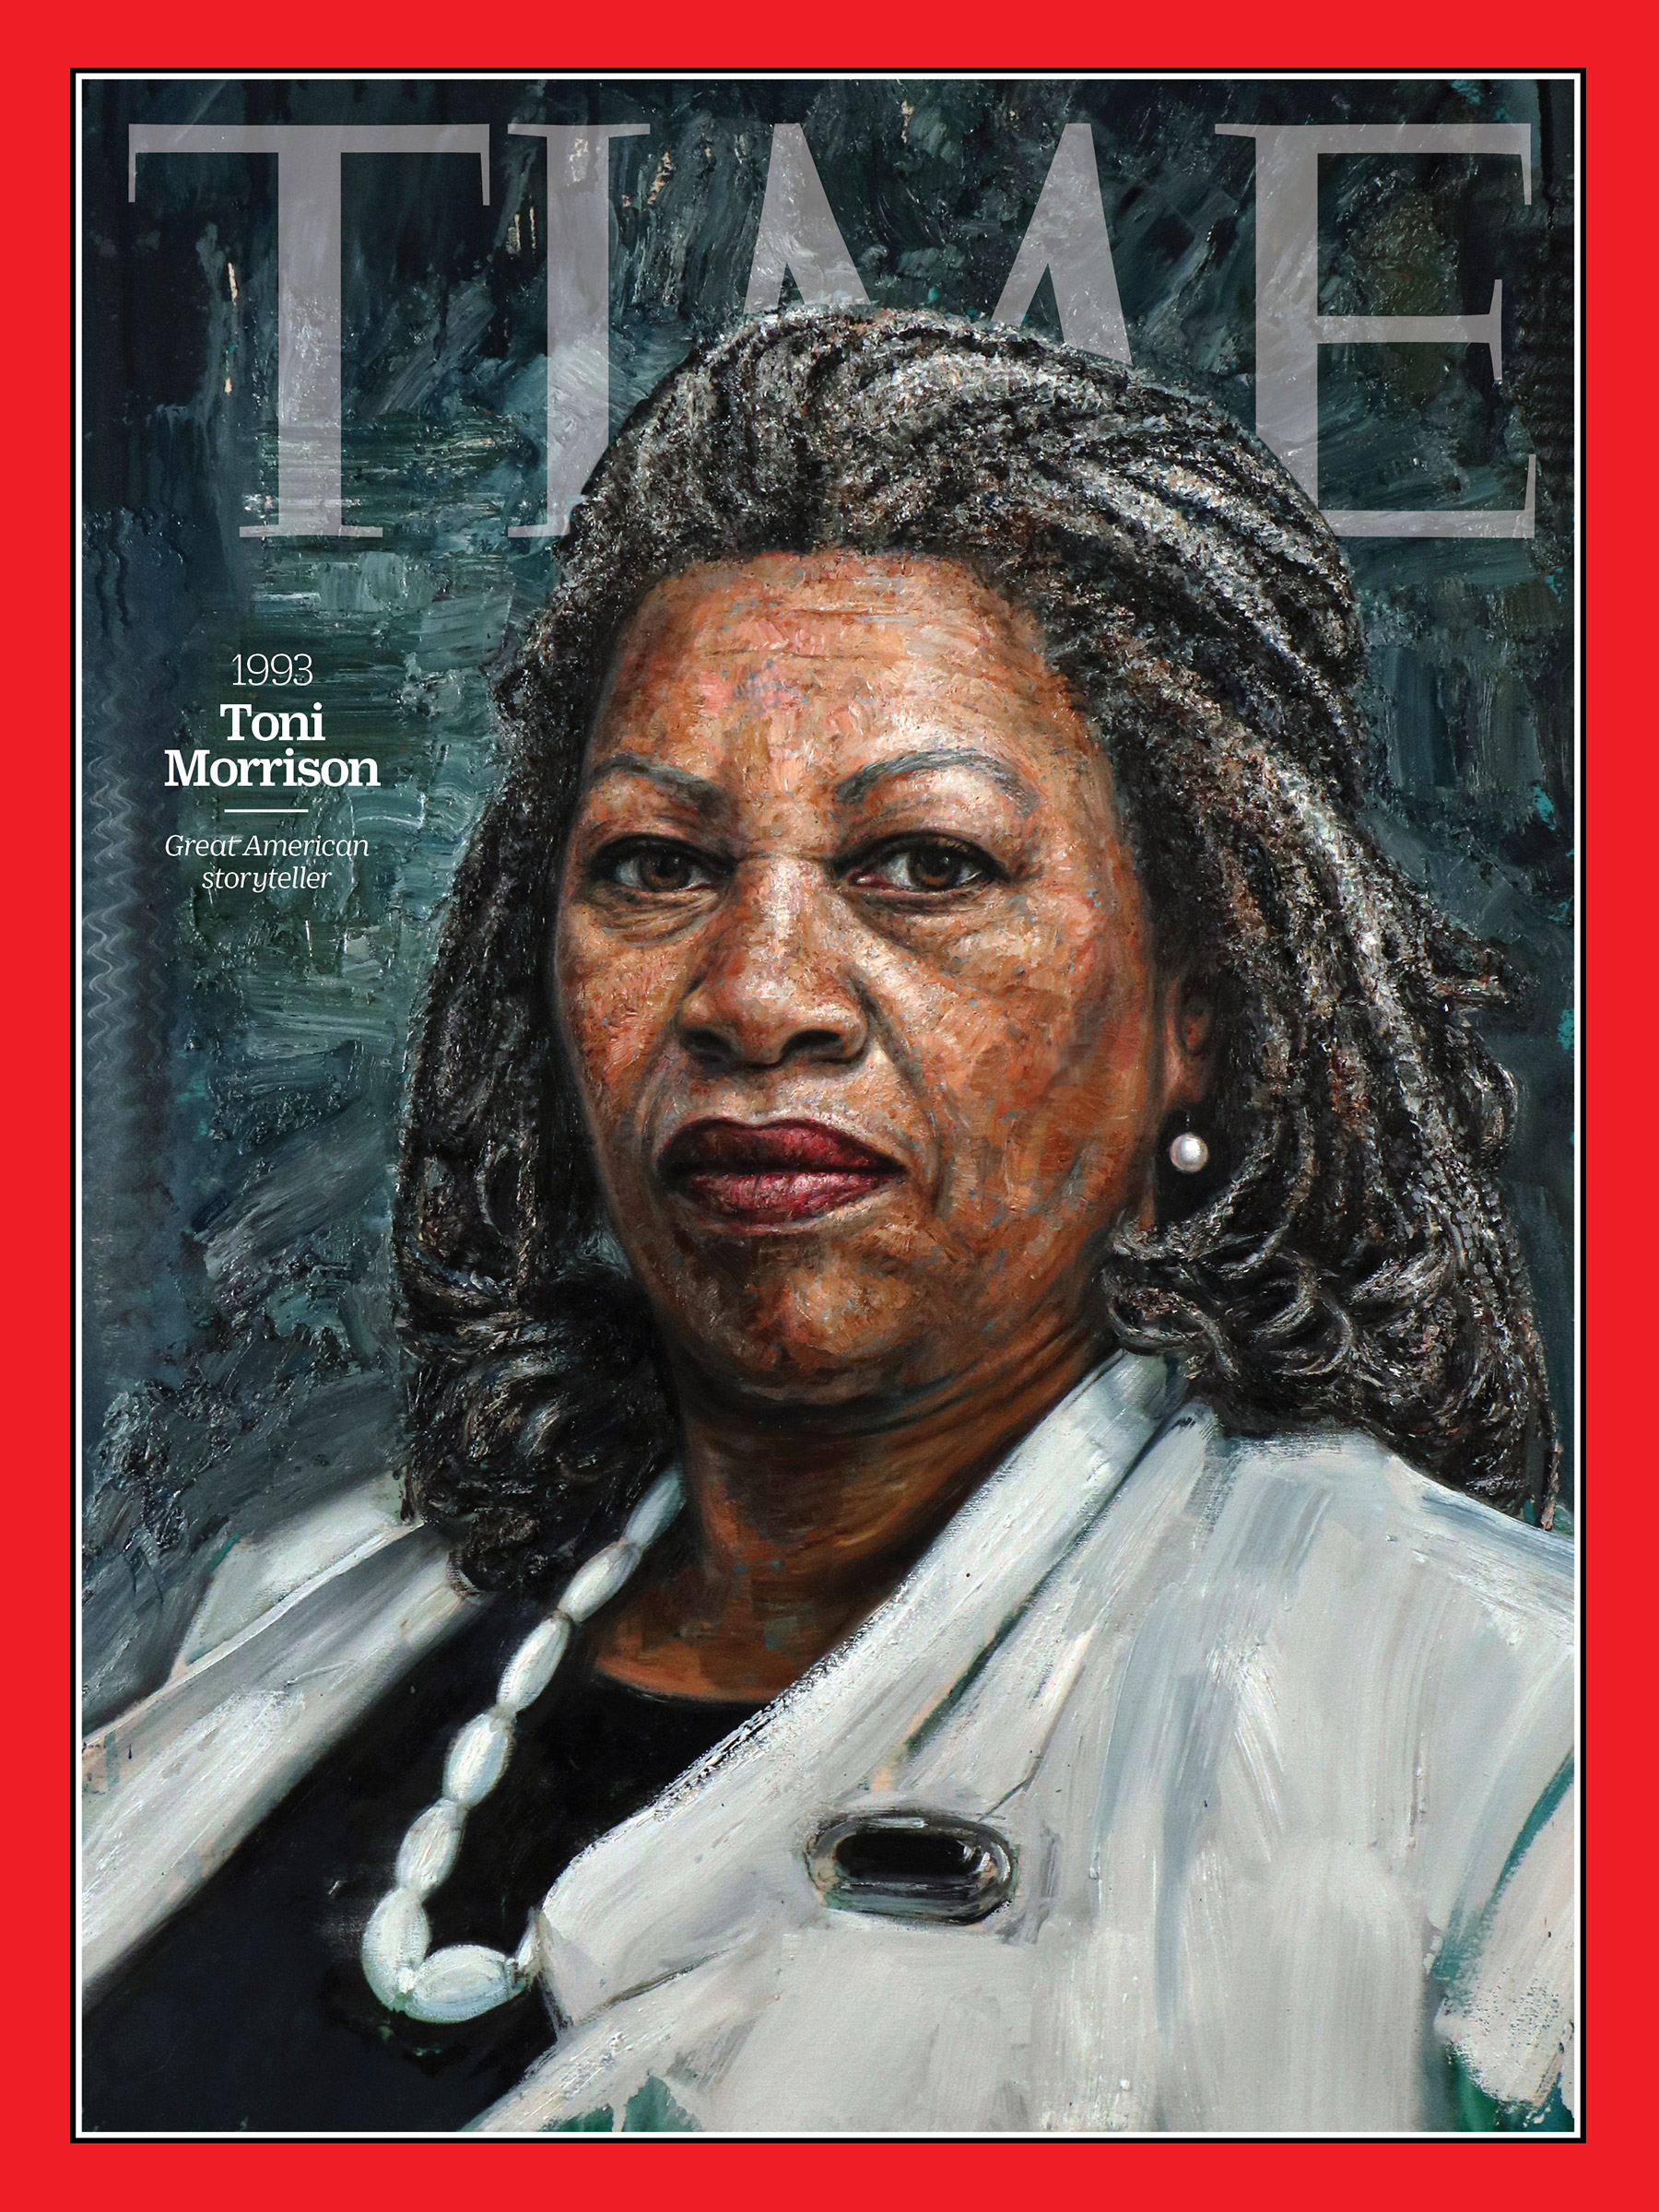 <a href="https://fineartamerica.com/featured/toni-morrison-1993-time.html"><strong>Buy the cover art→</strong></a> (Portrait by Tim Okamura for TIME; Schiffer-Fuchs—Ullstein Bild/Getty)